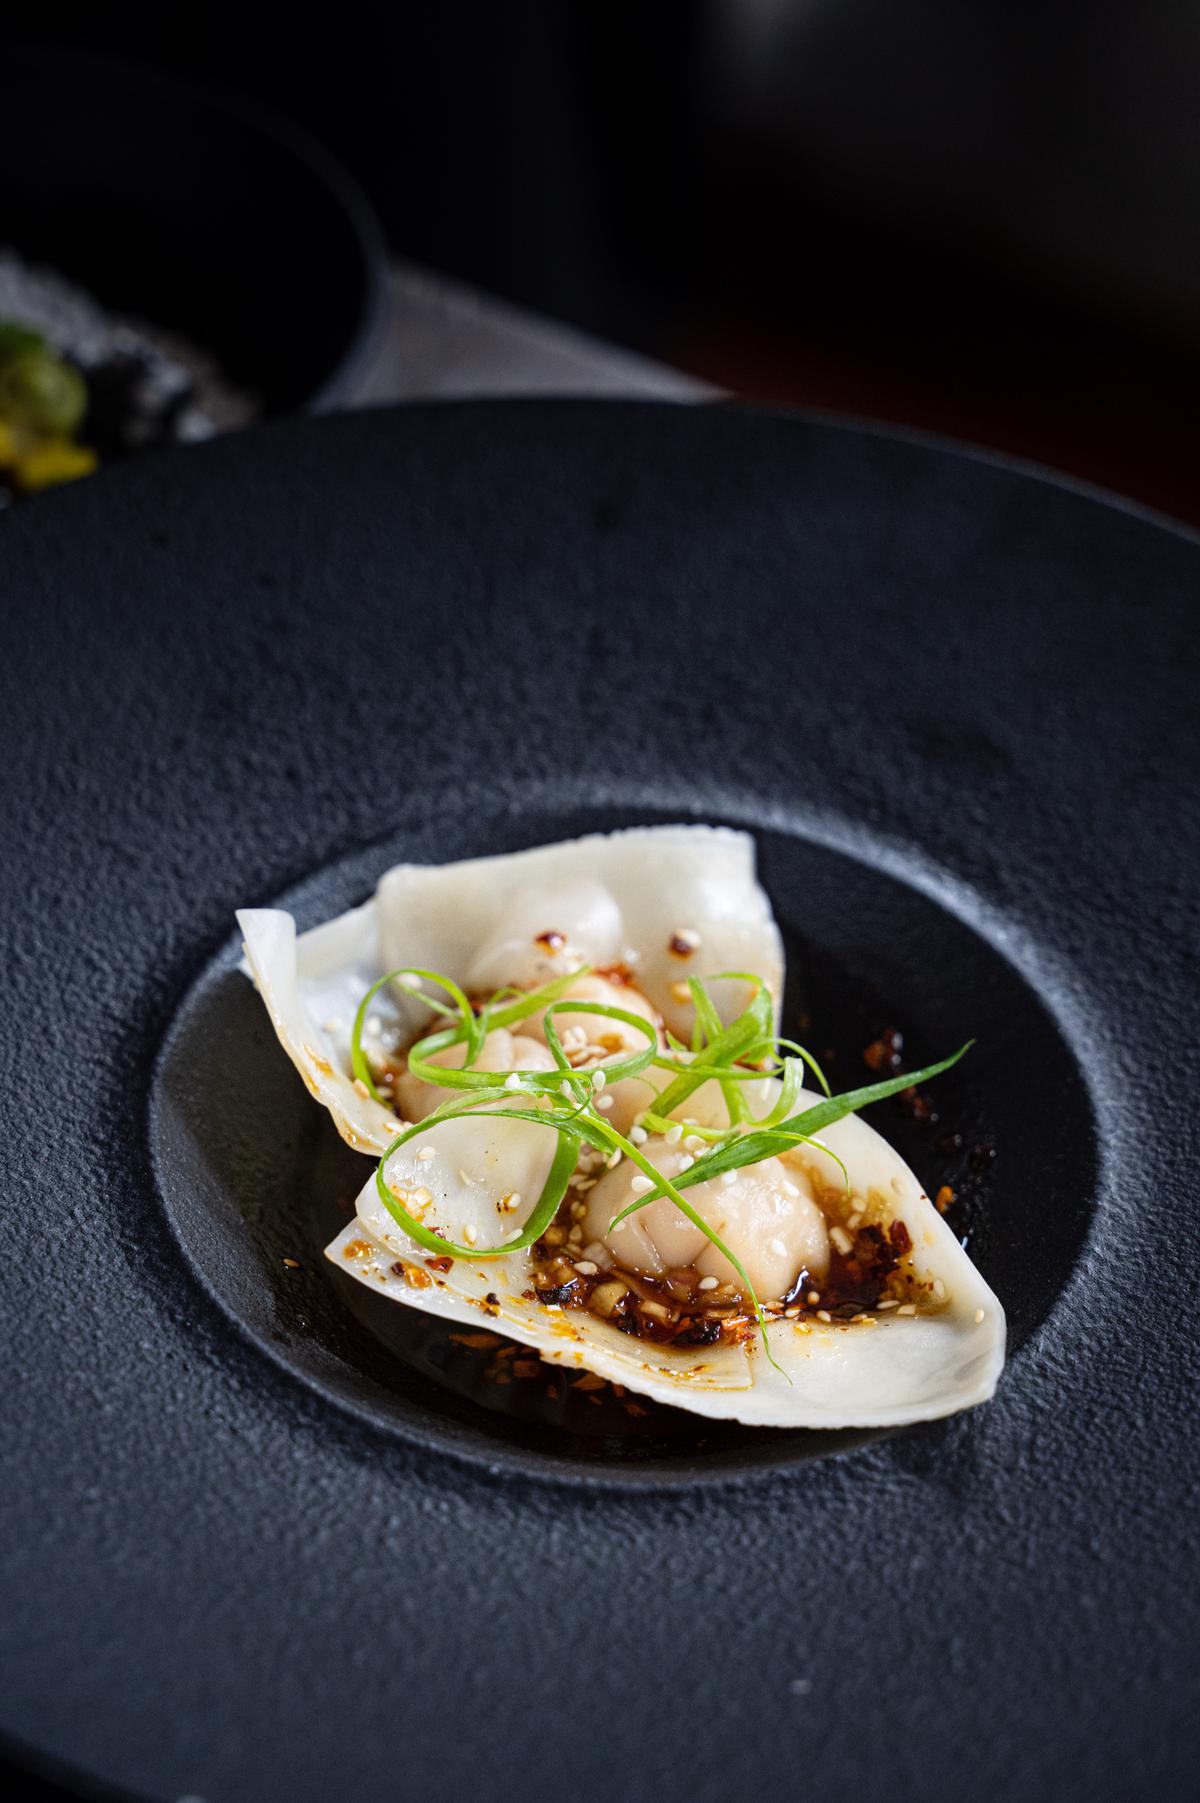 Prawn wontons with black vinegar and tamari dressing, Sichuan chilli oil, spring onion and toasted white sesame seeds